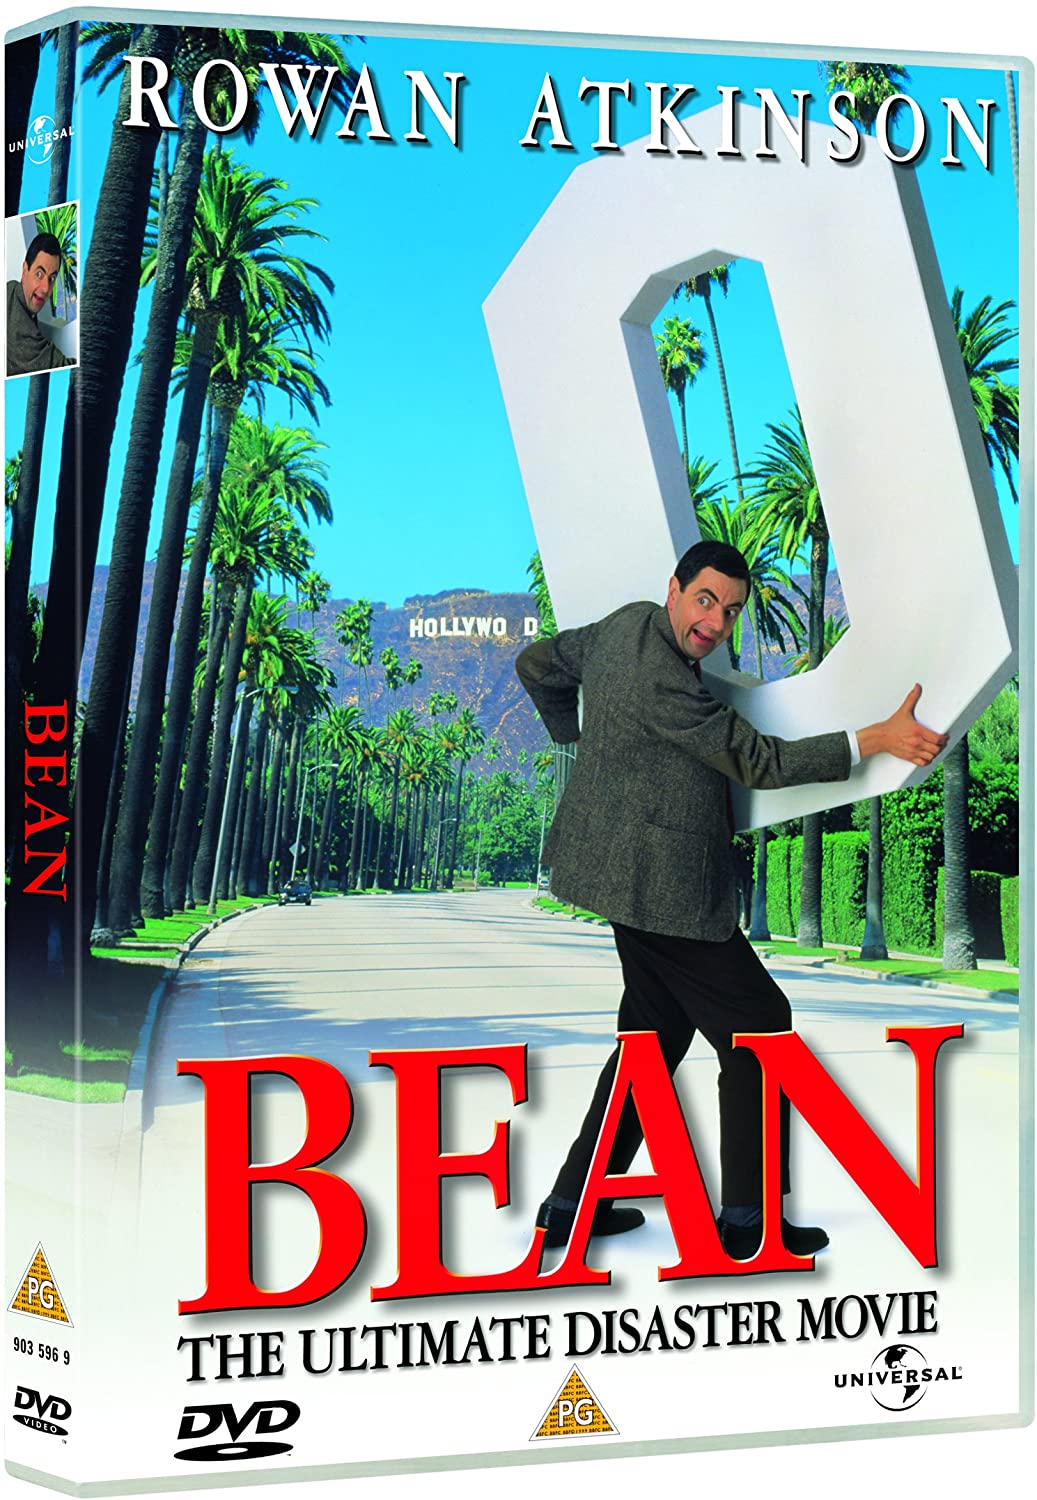 Bean - the Ultimate Disaster Movie [1997] [DVD]